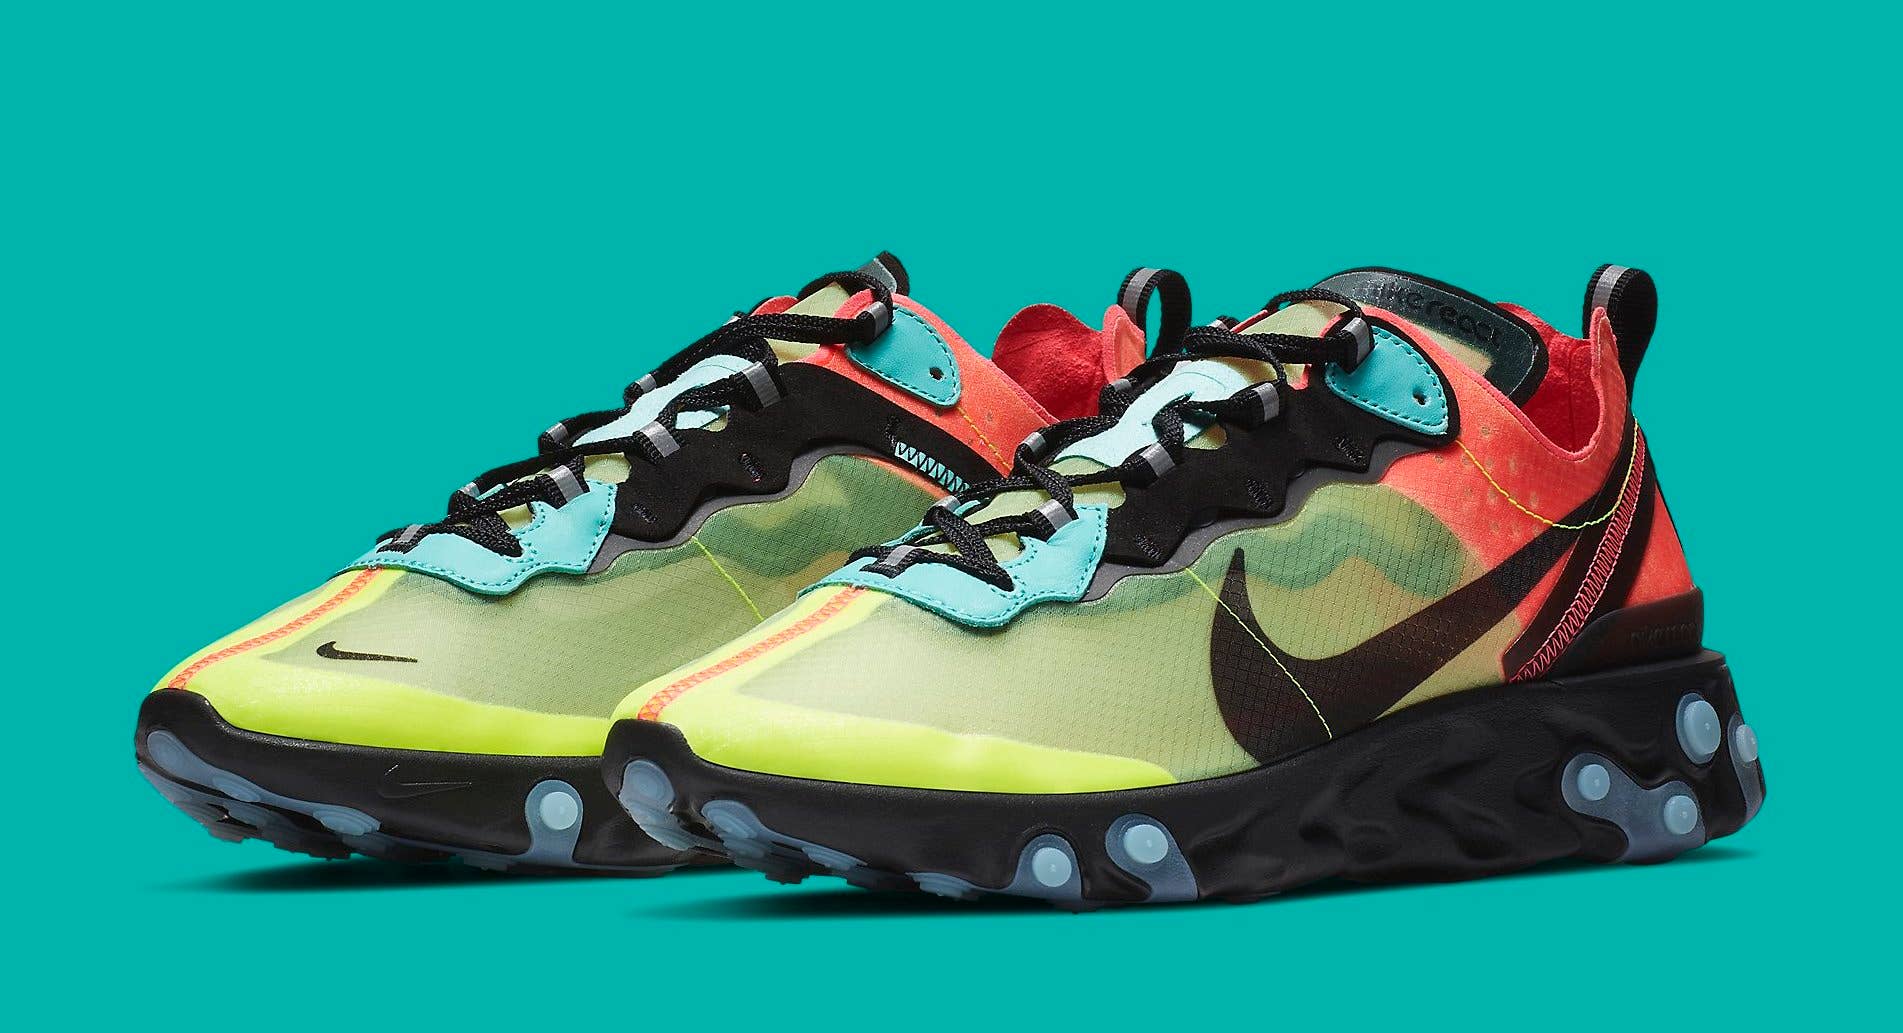 More Colorful React Element 87s the Way | Complex